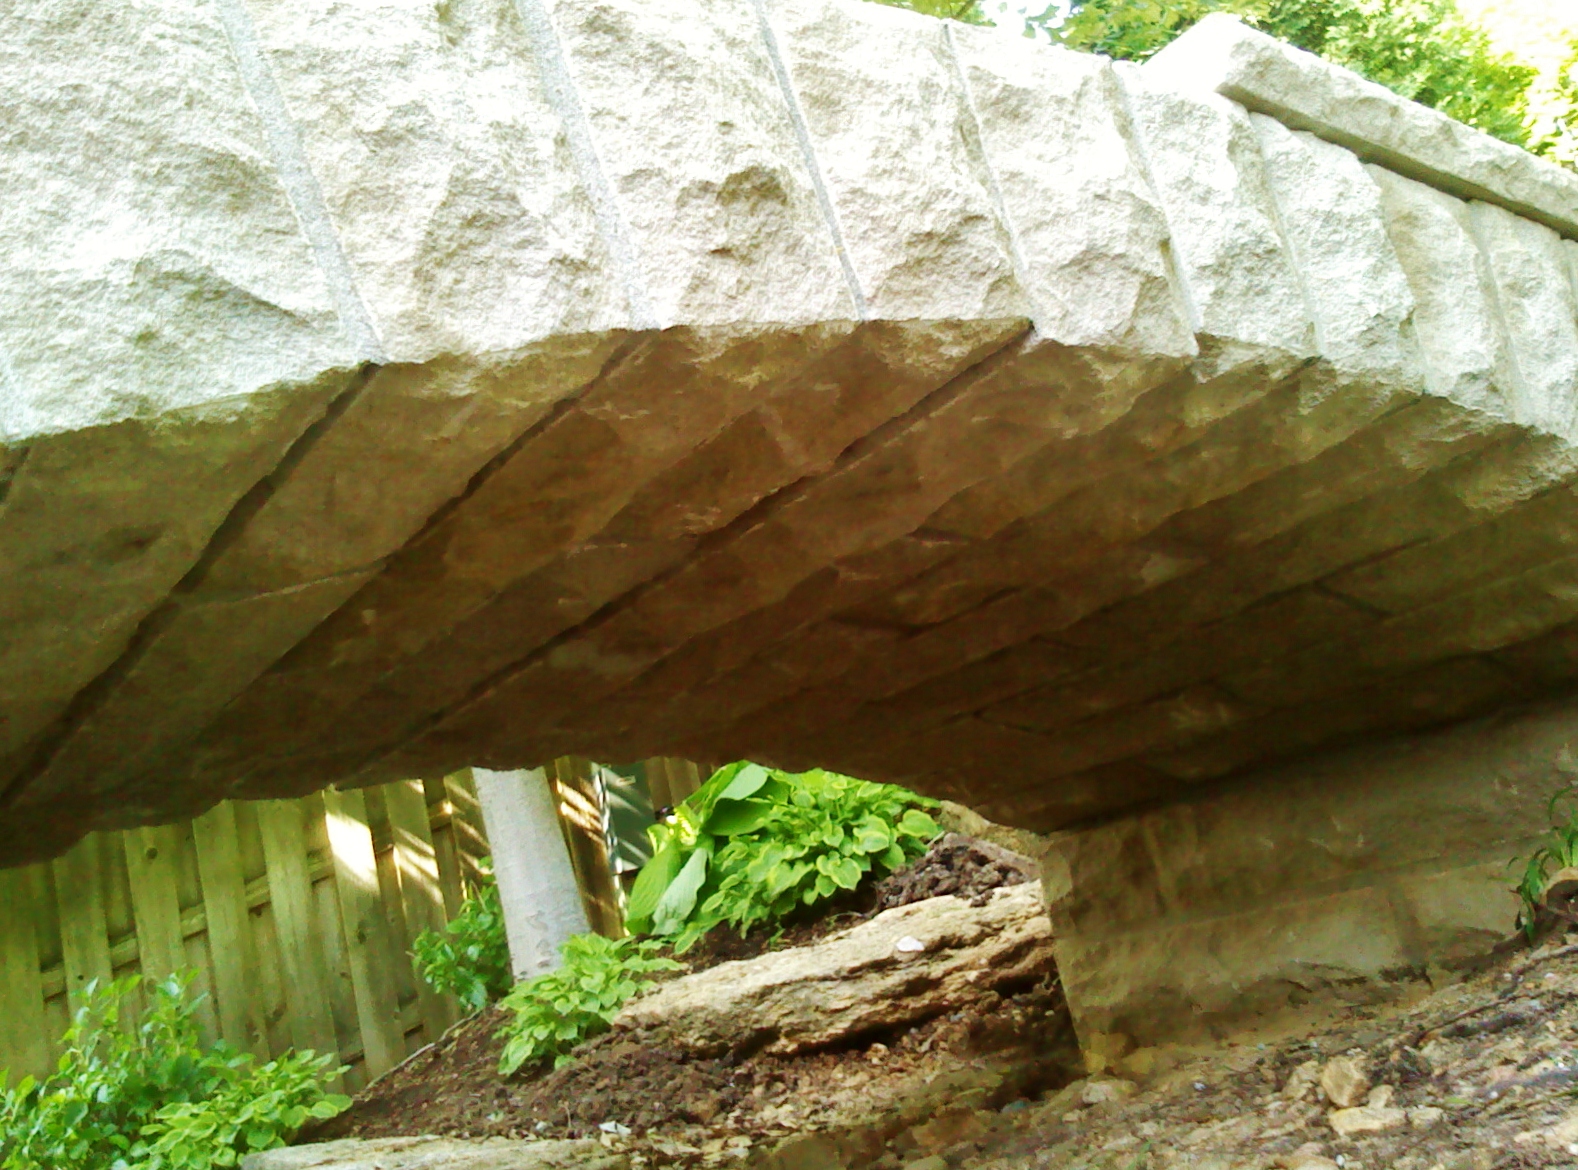 Stone arch bridge, no concrete here!  This bridge is all stone.   Stone Works  Lee Lindsey  St. Louis MO